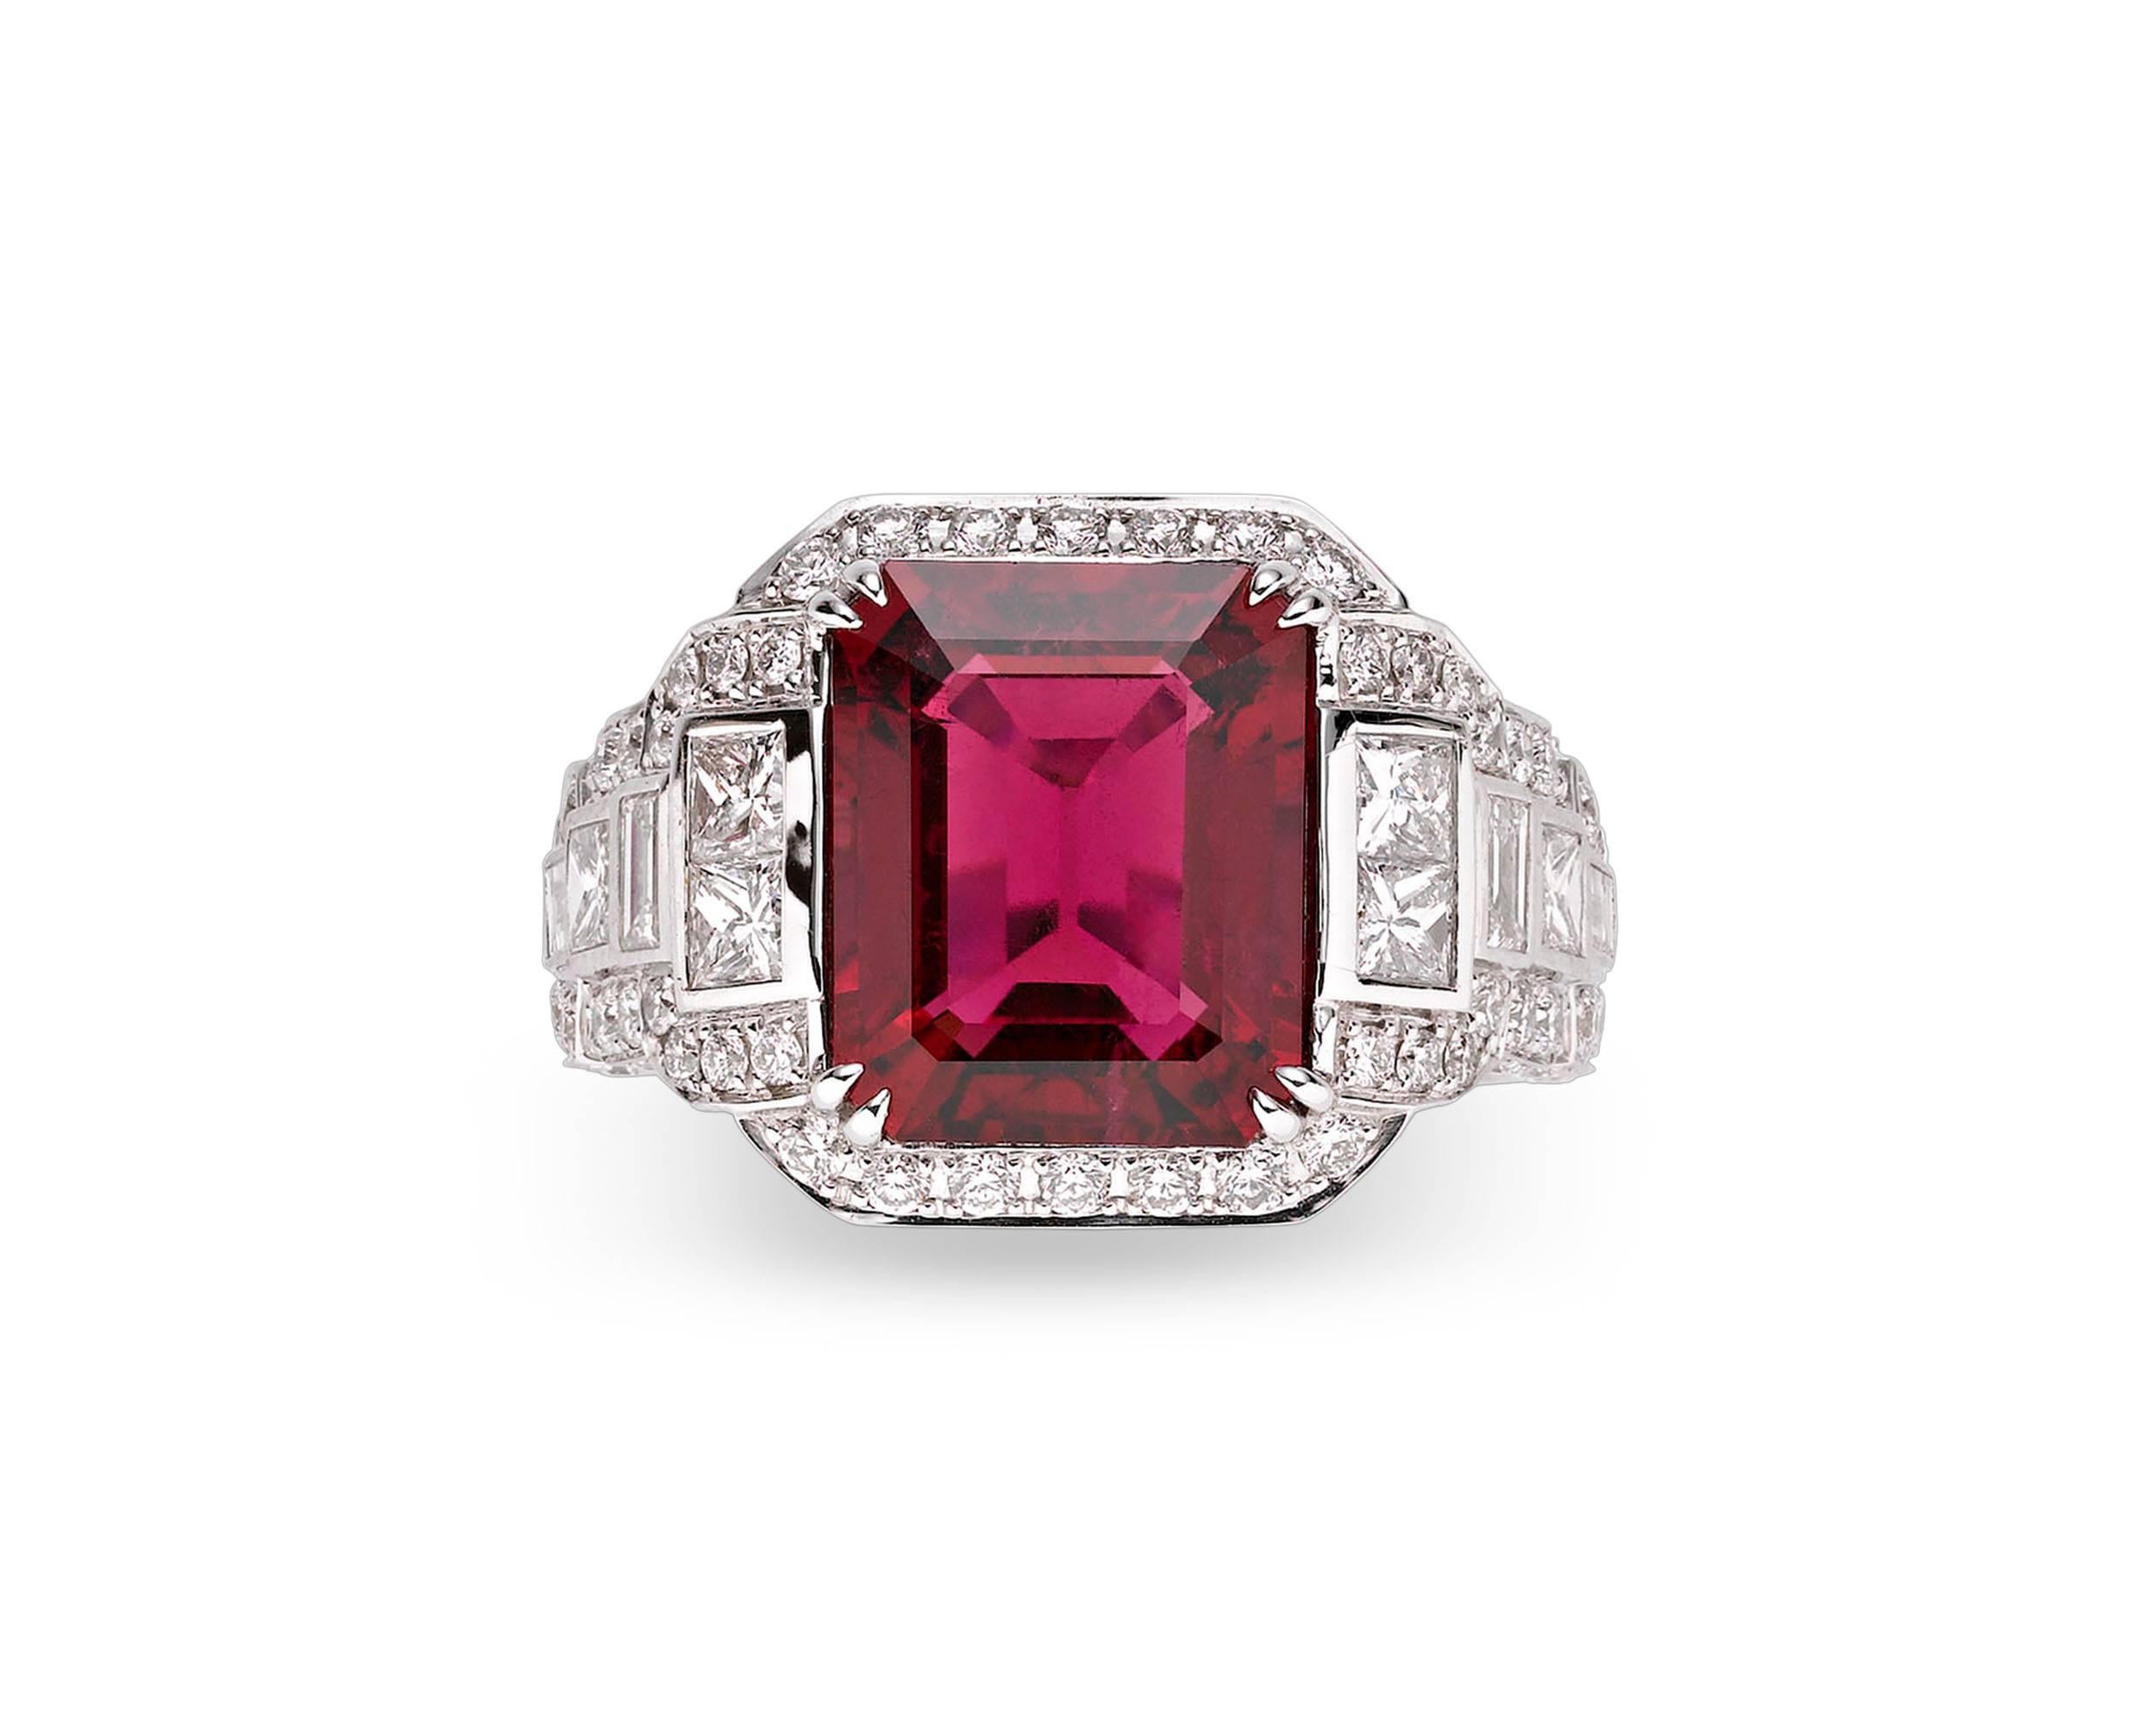 Featuring sparkling diamond encrusted steps and a vibrant rubellite gemstone, this architecturally-inspired, Art Deco-style ring is a true conversation piece. The 5.13 carat rubellite at the ring’s center displays a deep crimson hue that is